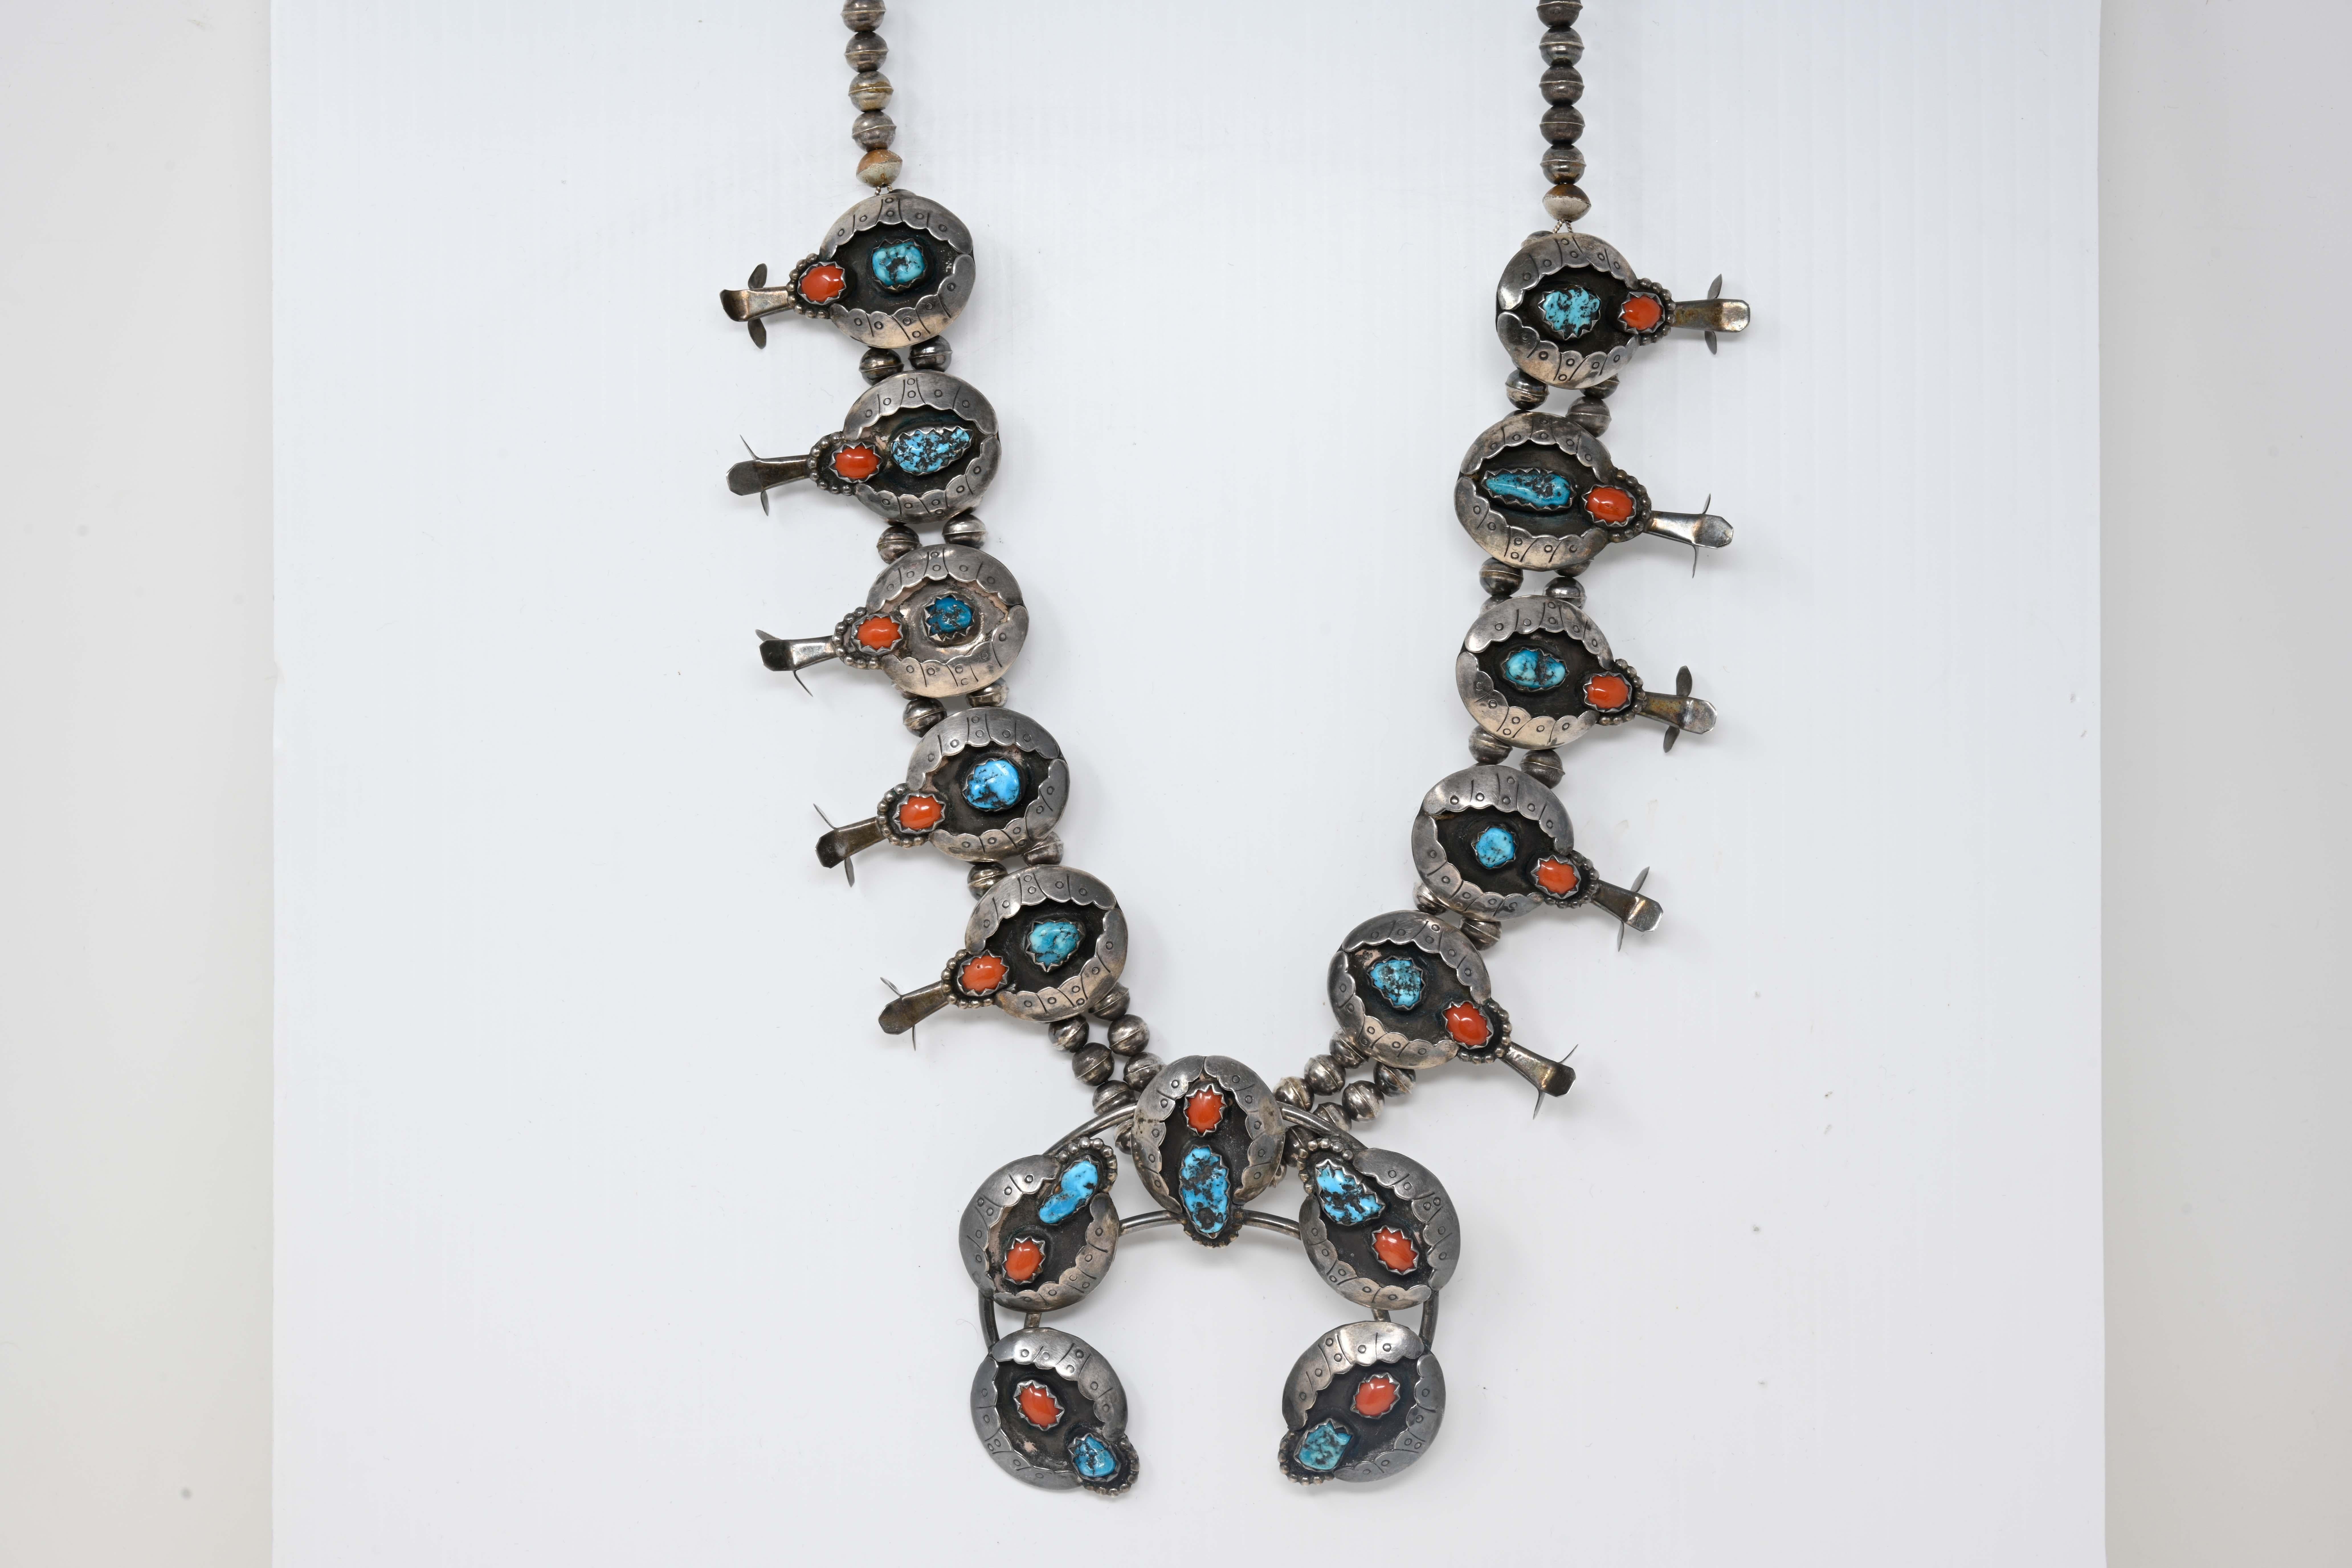 Native American Navajo squash blossom sterling silver turquoise coral necklace. Signed on the back Elizabeth M. Thompson, no silver mark but acid tested. The necklace is made of chunks of turquoise and oval shaped coral. The necklace measures 25